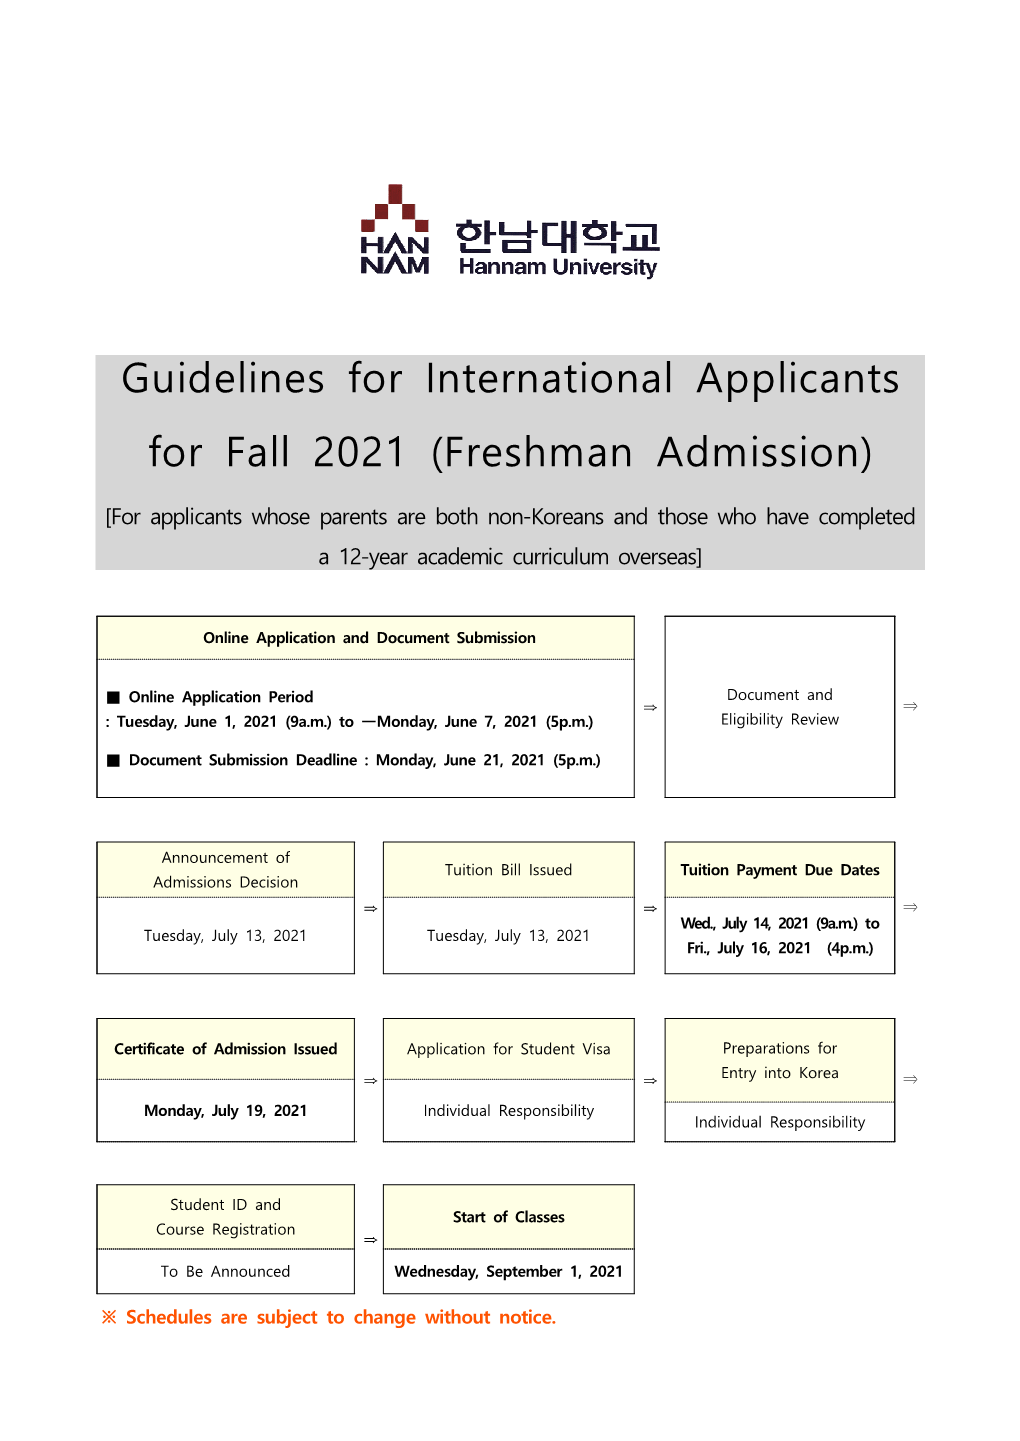 Guidelines for International Applicants for Fall 2021 (Freshman Admission)